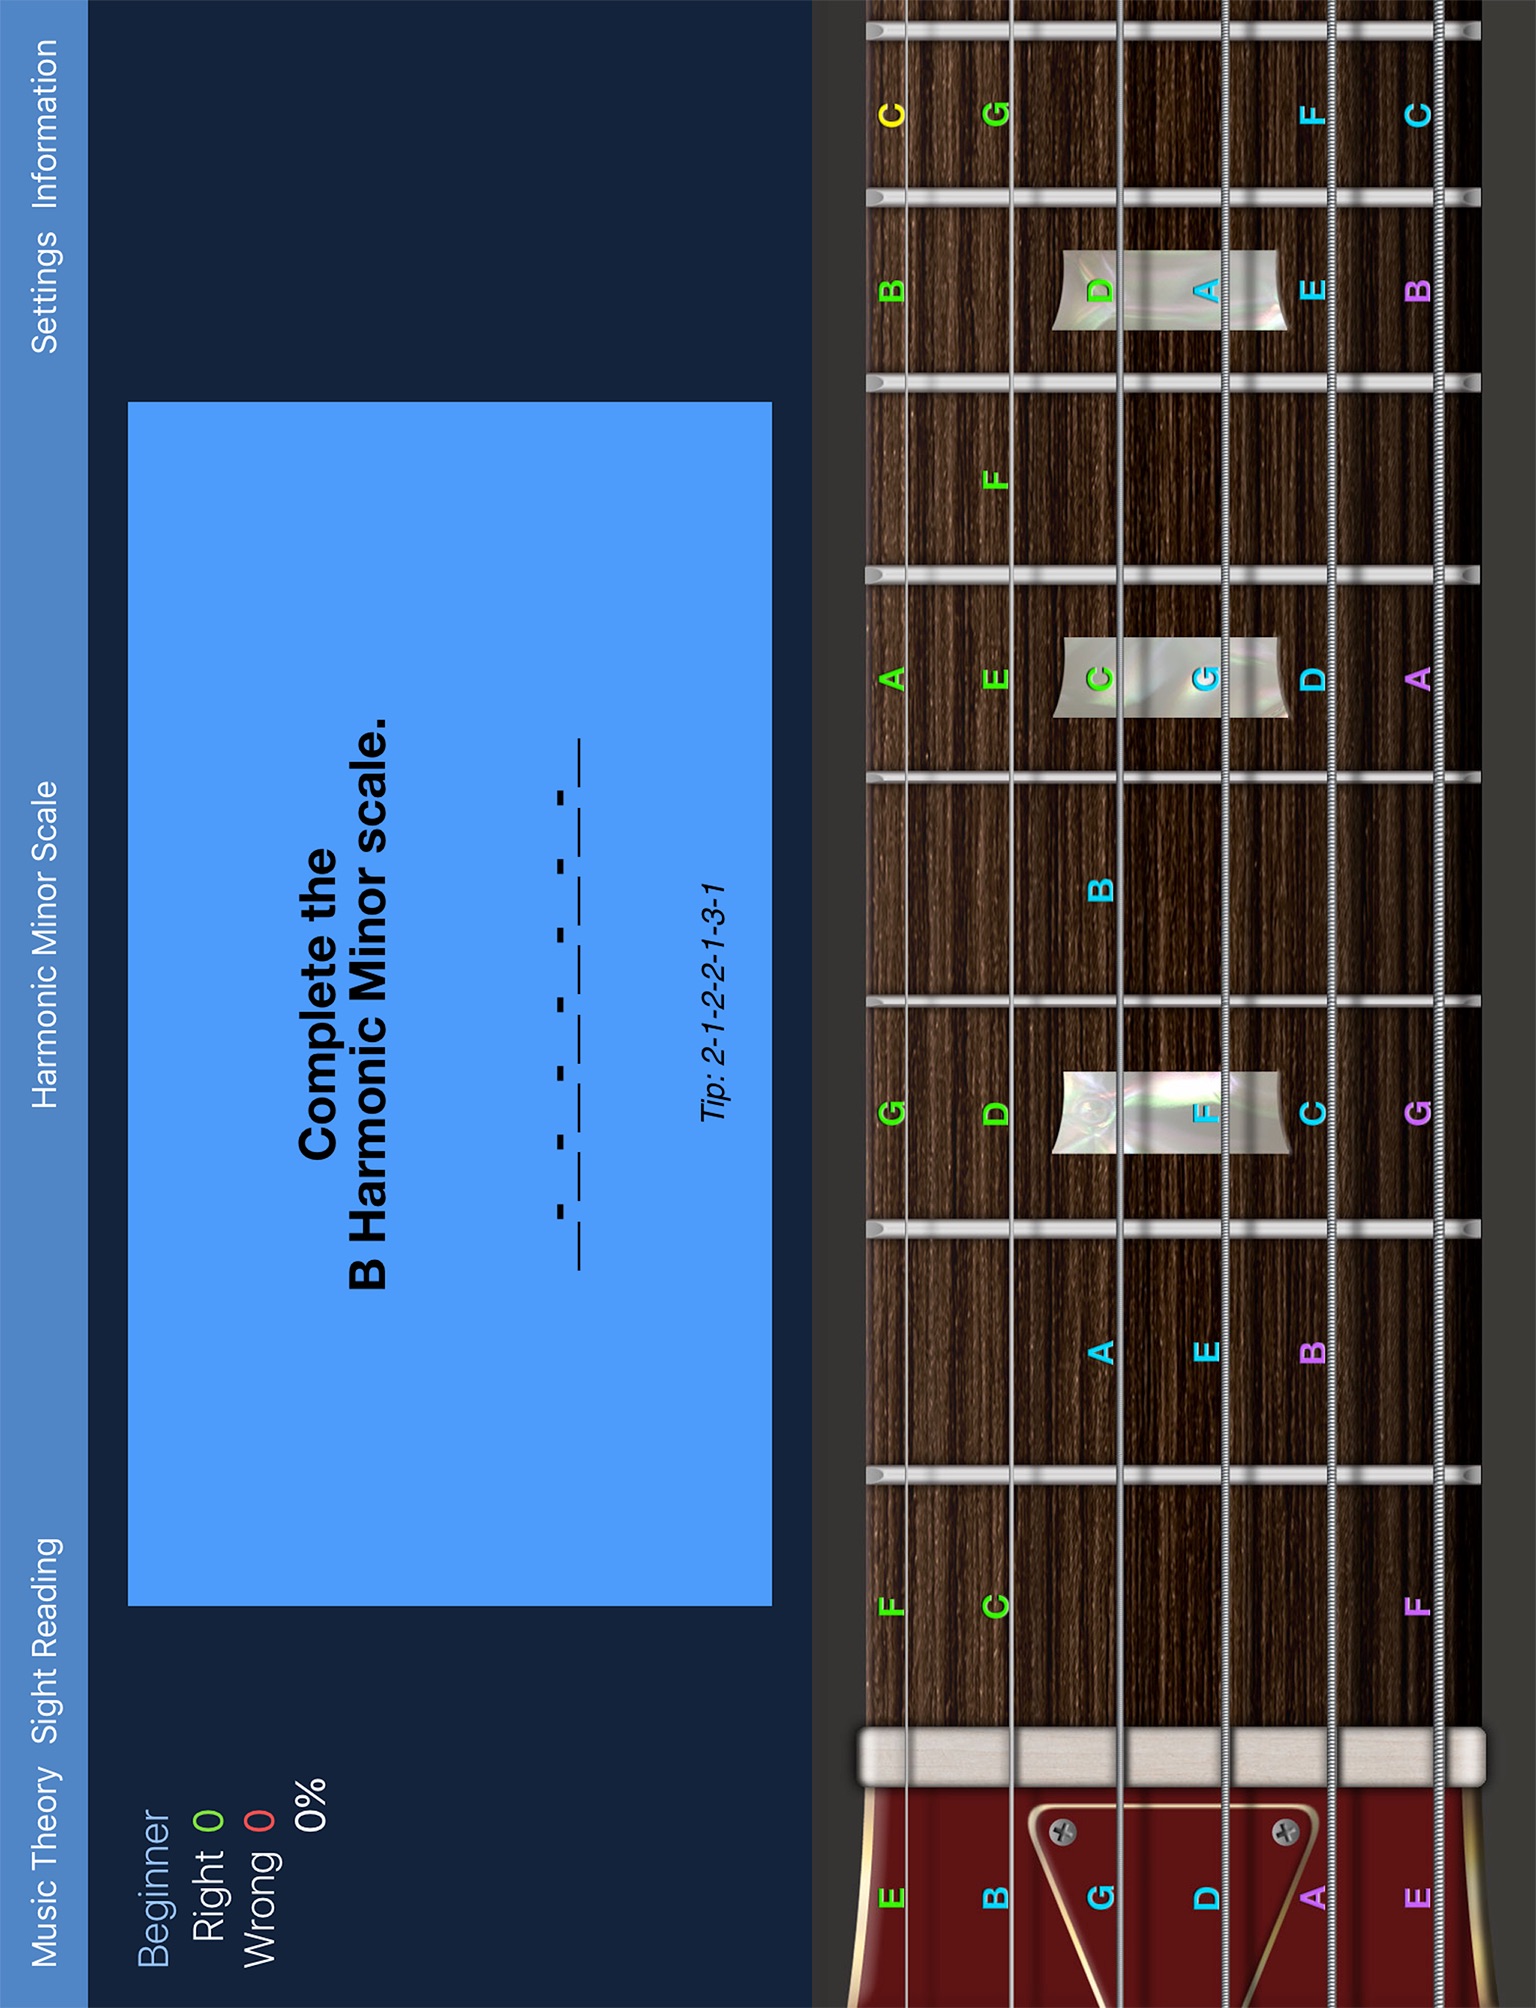 Music Theory by Musicopoulos screenshot 4